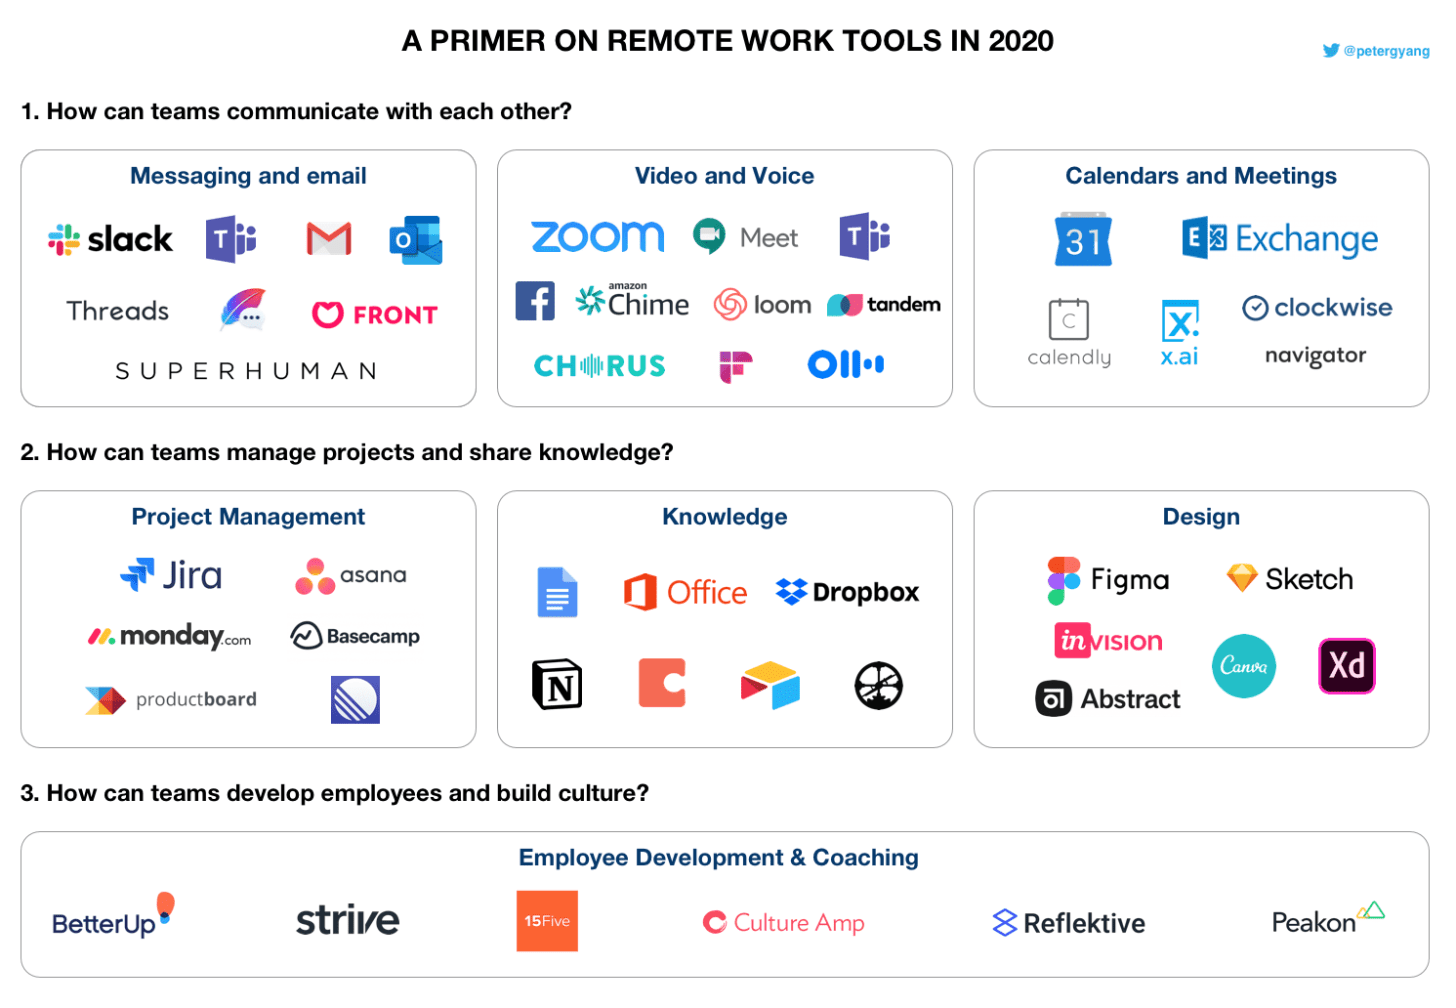 Remote working tools organized by category